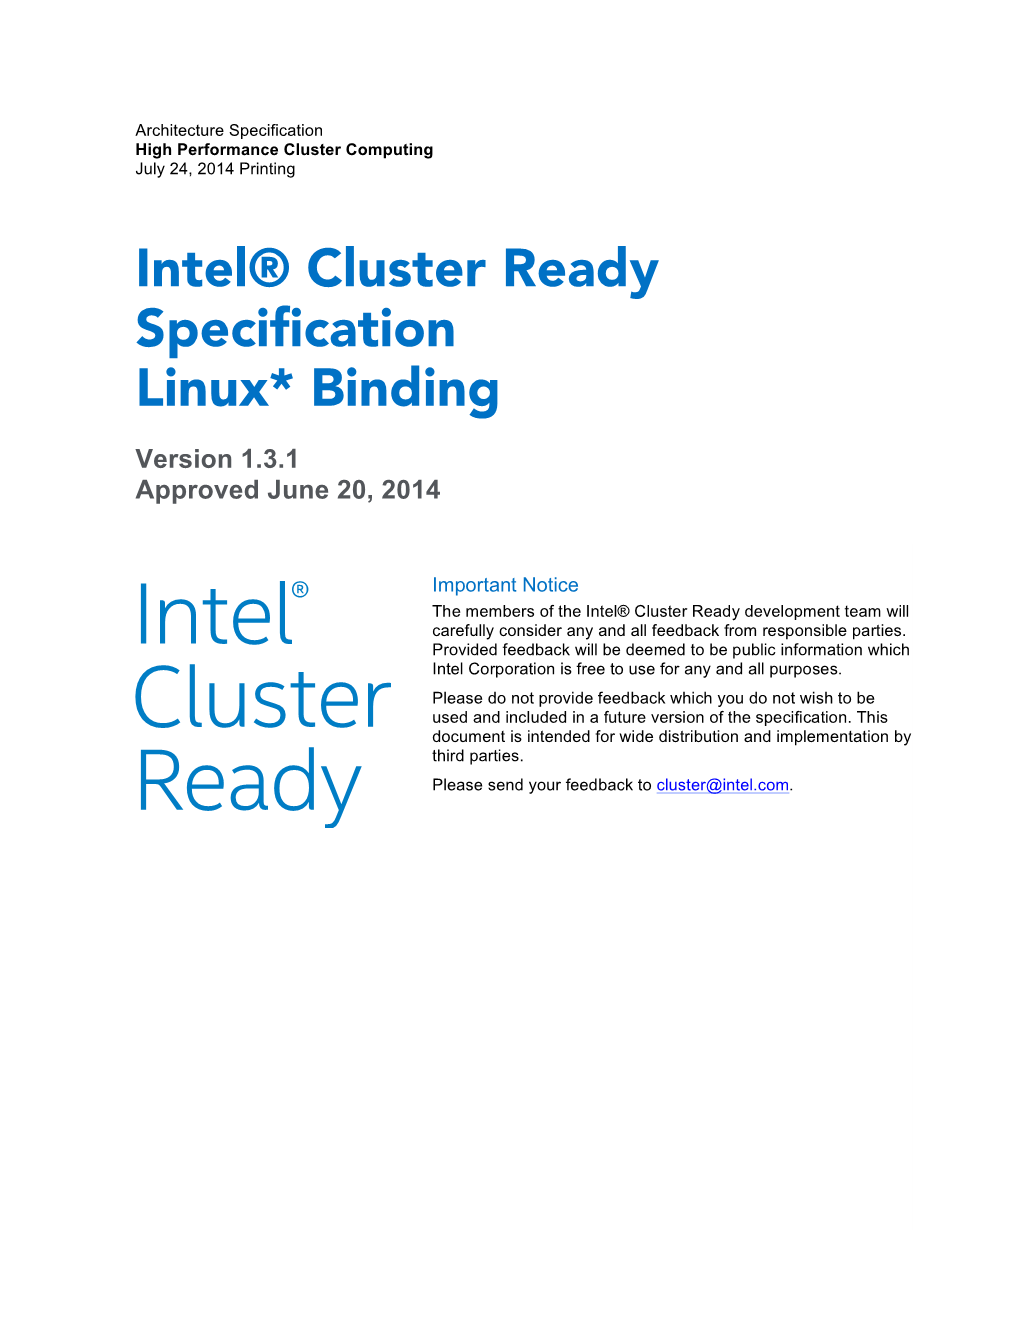 Intel® Cluster Ready Specification Linux* Binding